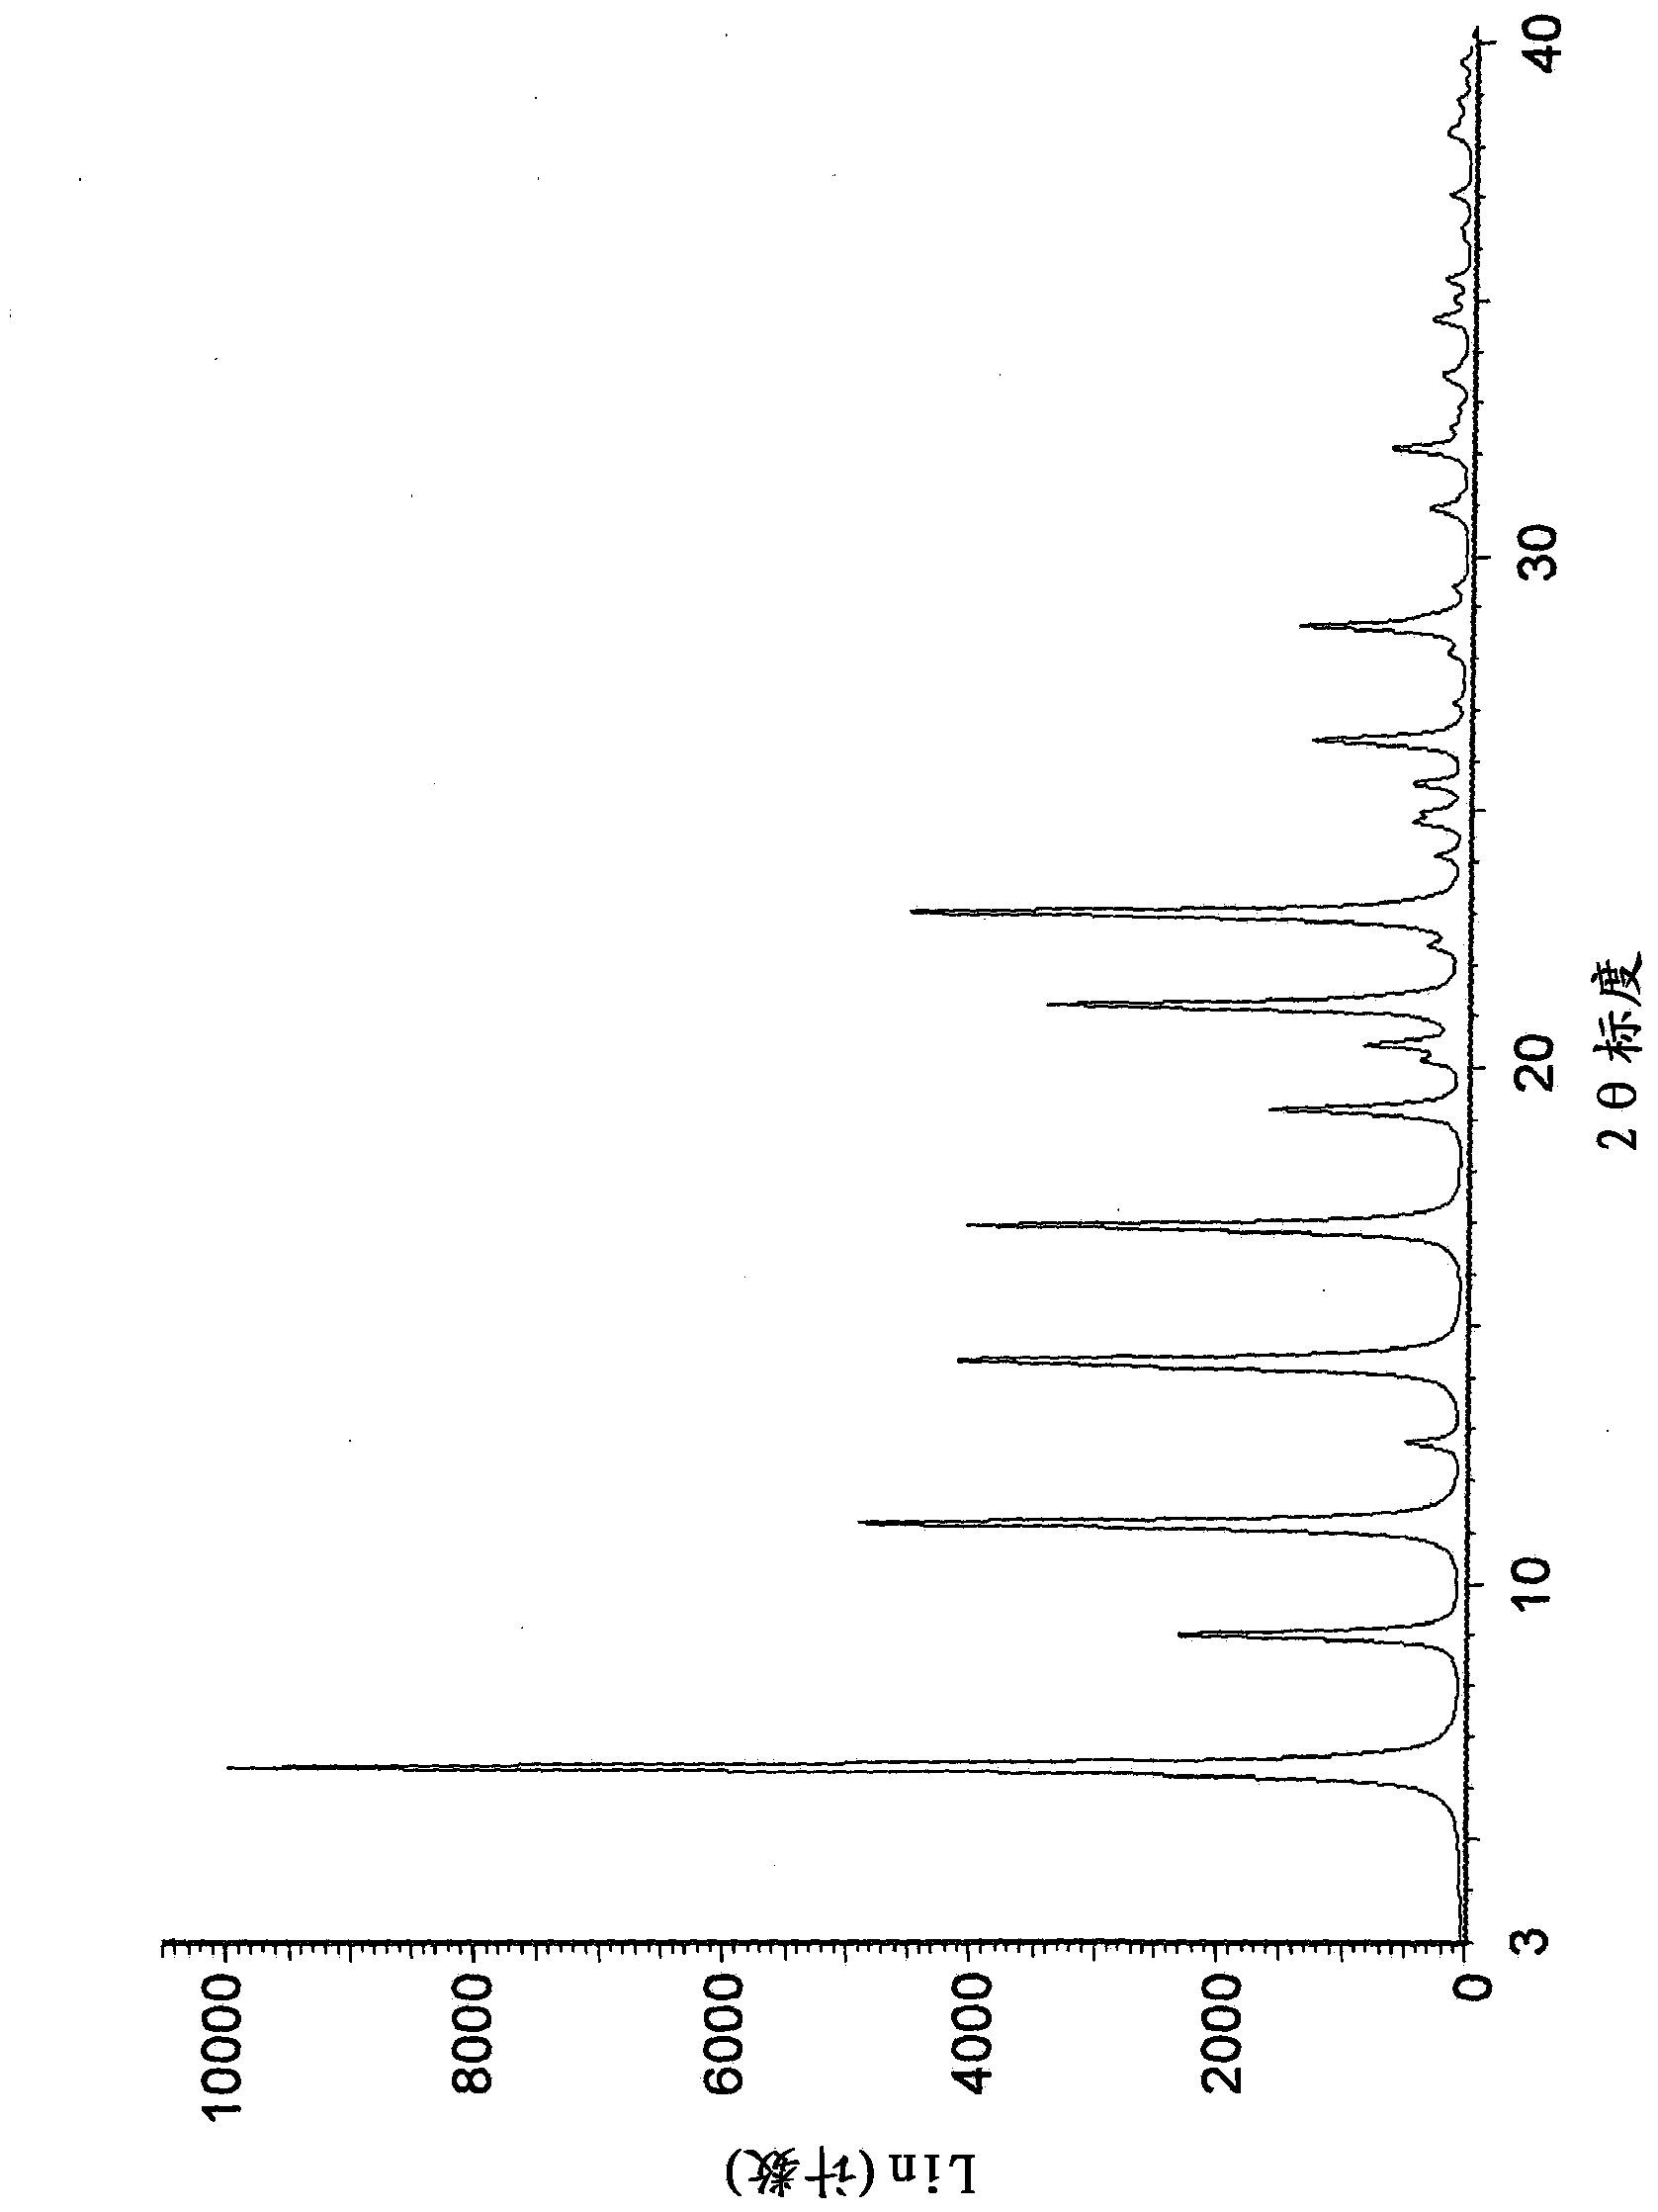 Crystalline and non-crystalline forms of tofacitinib, and a pharmaceutical composition comprising tofacitinib and a penetration enhancer